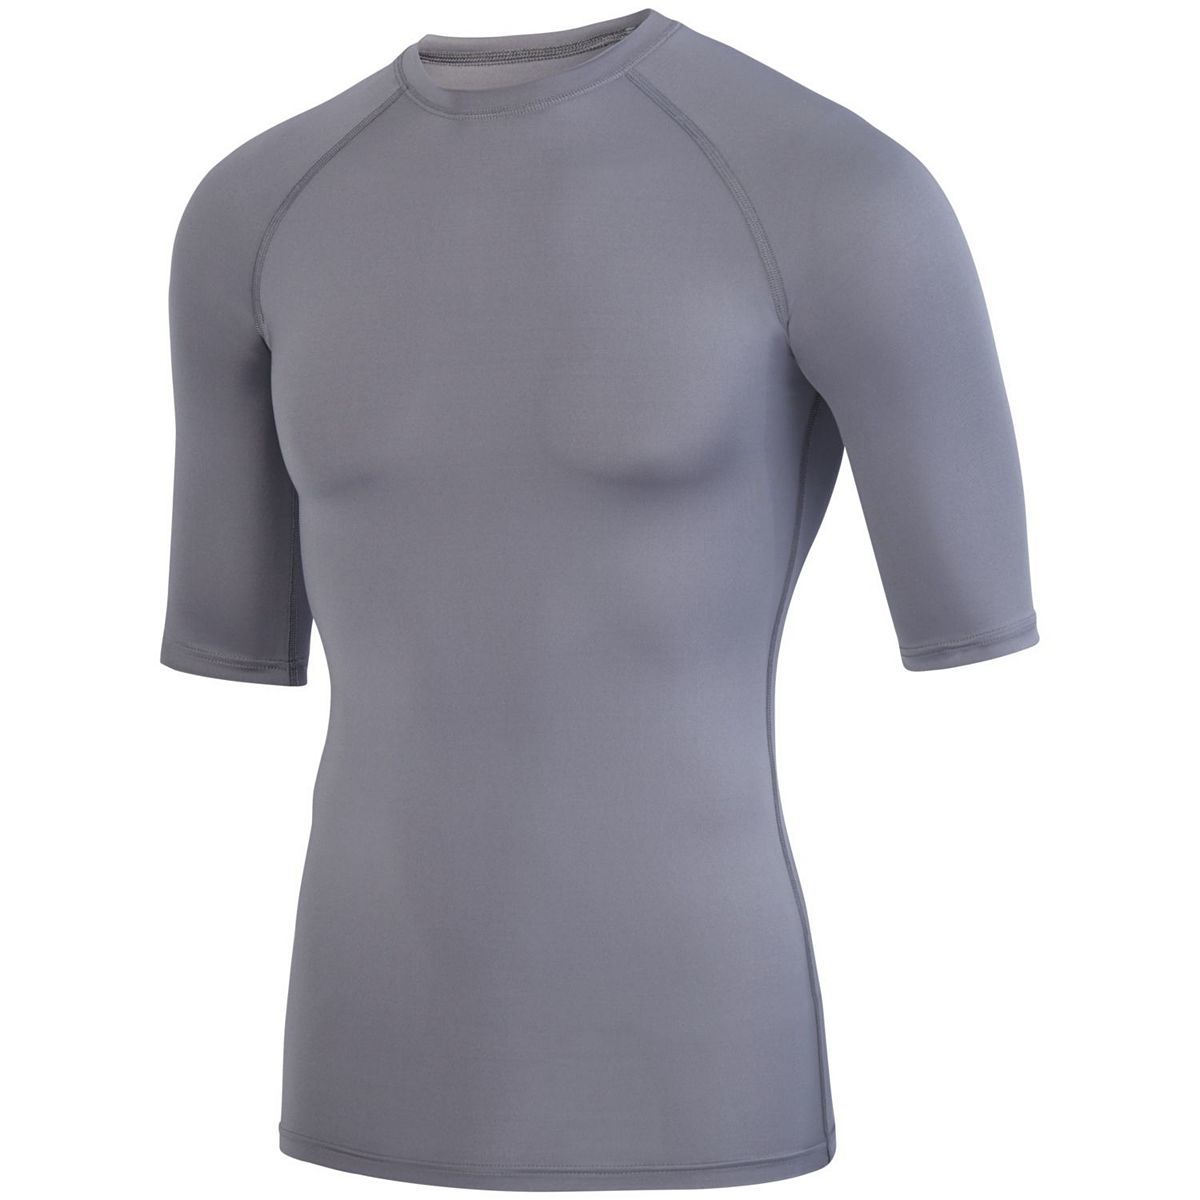 Augusta Sportswear Hyperform Compression Half Sleeve Tee in Graphite  -Part of the Adult, Adult-Tee-Shirt, T-Shirts, Augusta-Products, Shirts product lines at KanaleyCreations.com